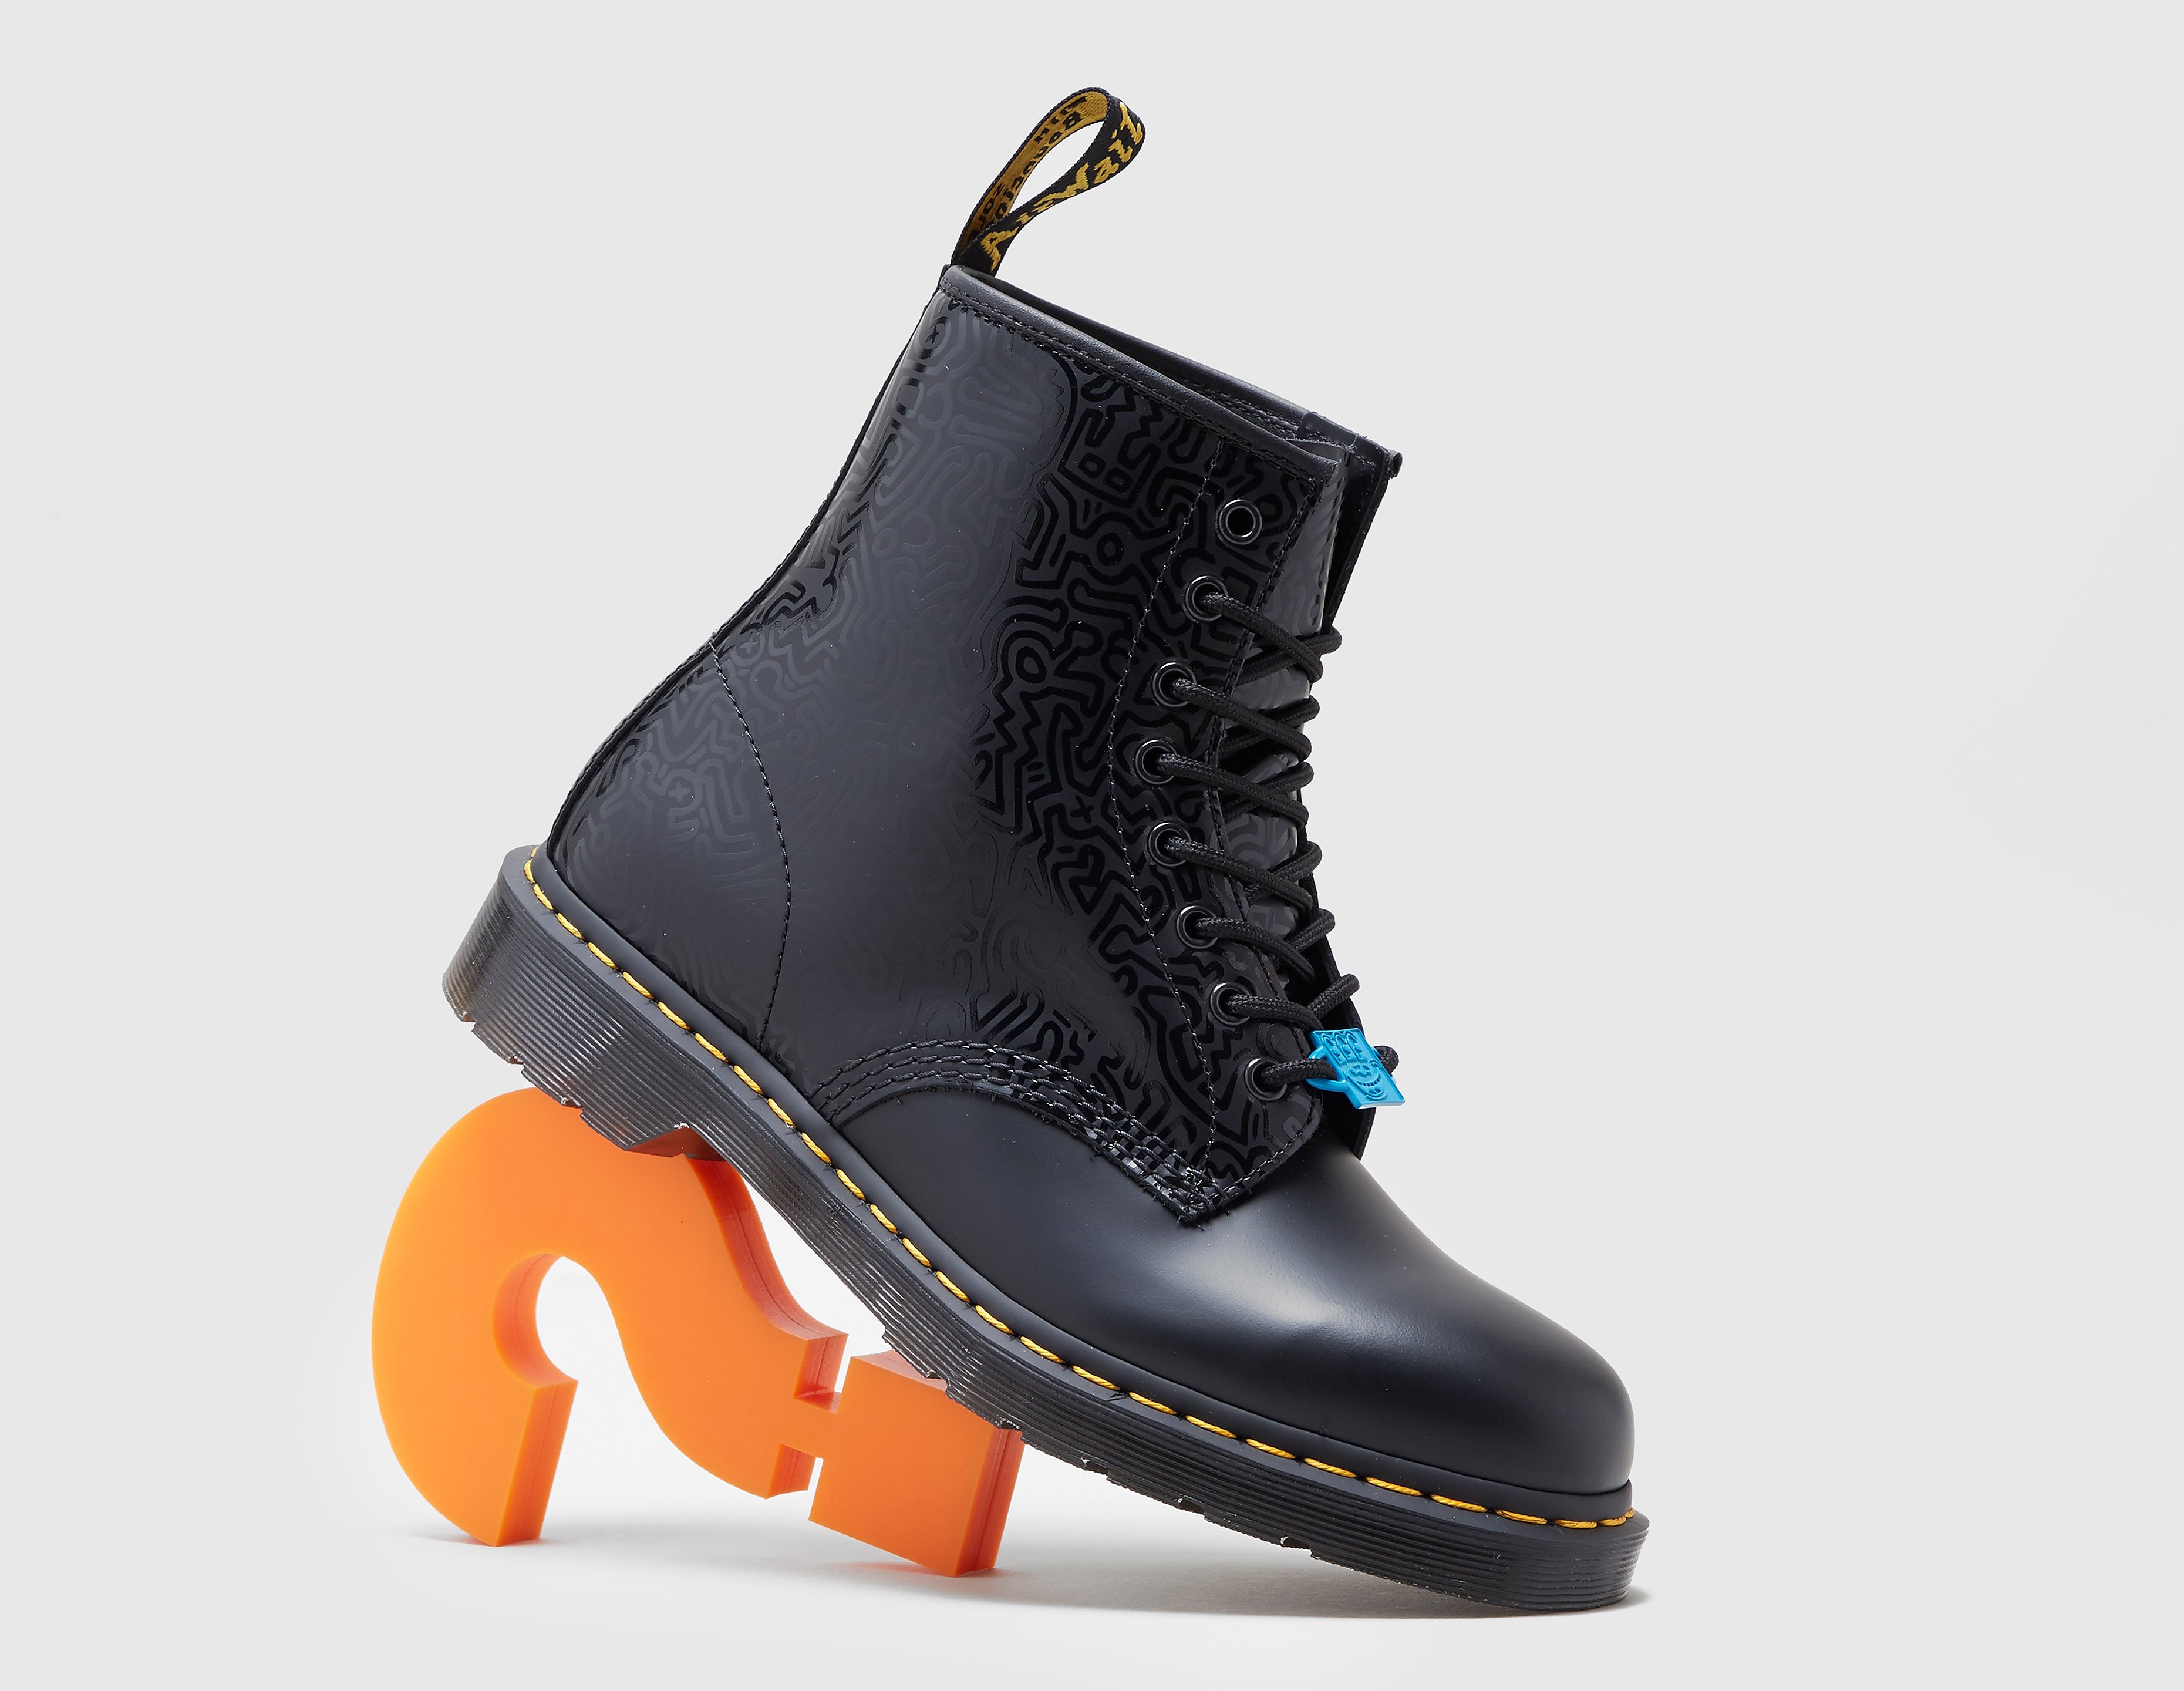 Dr. Martens x Keith Haring 1460